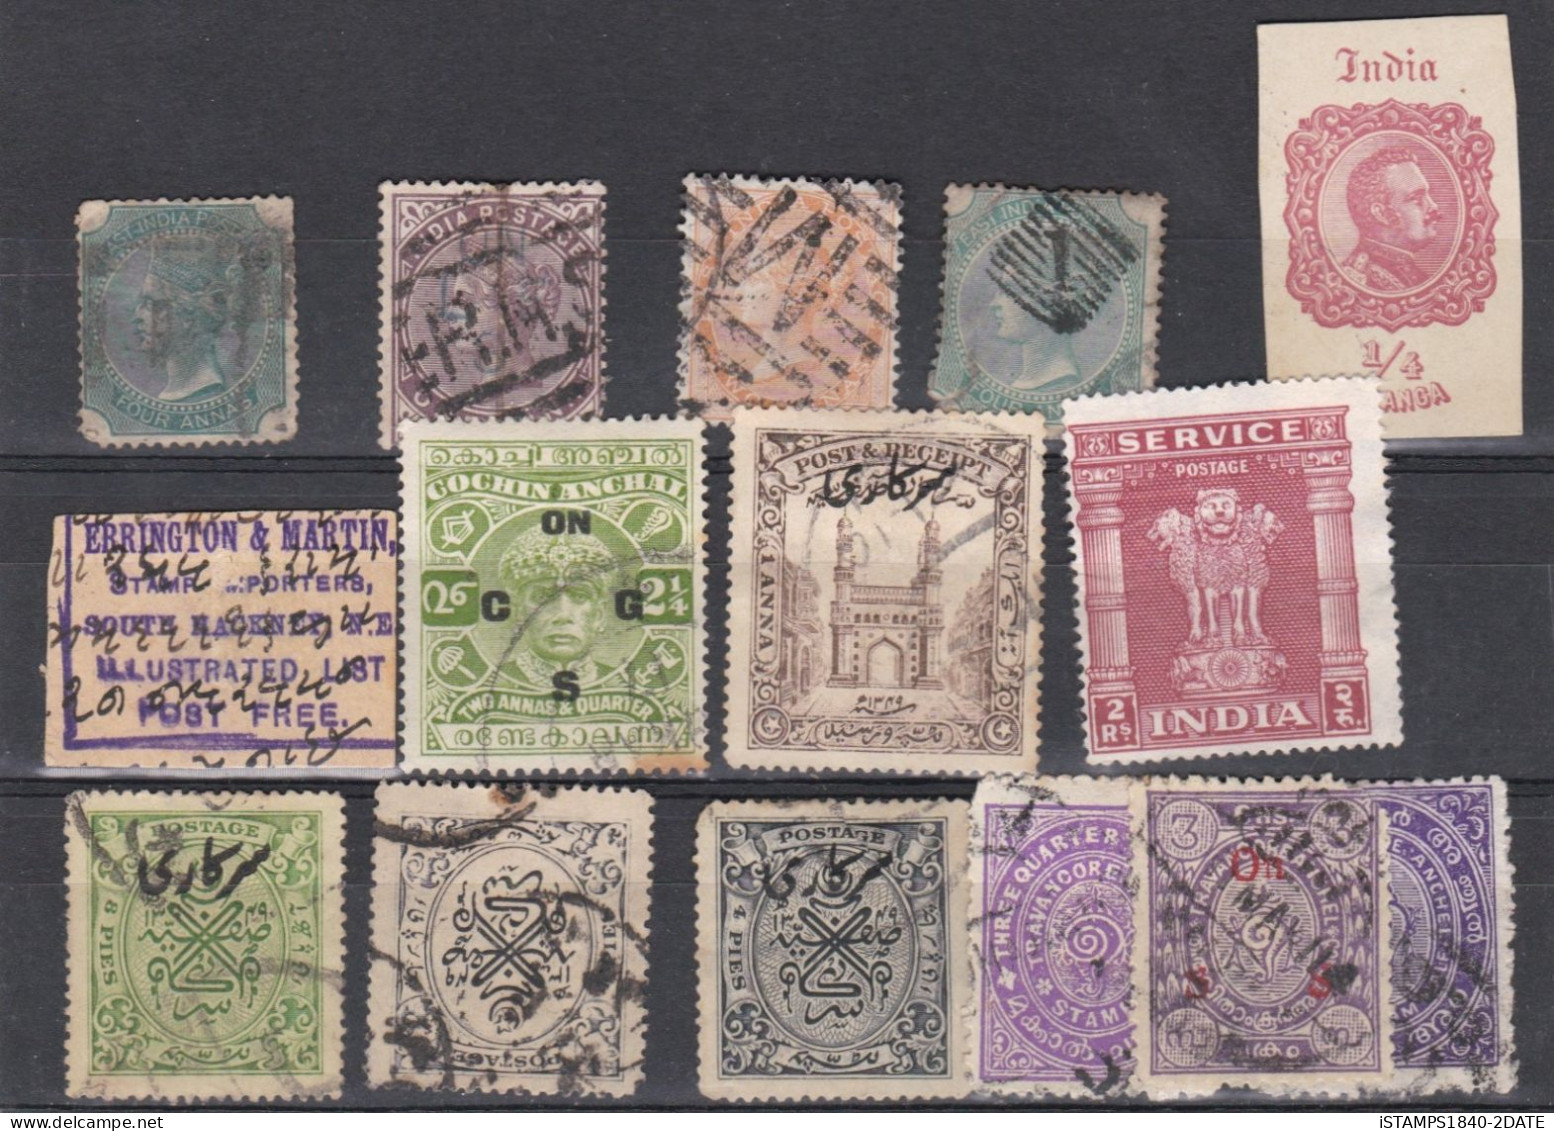 00032/ India QV+ Selection Including States 15 Items Used - 1882-1901 Imperium